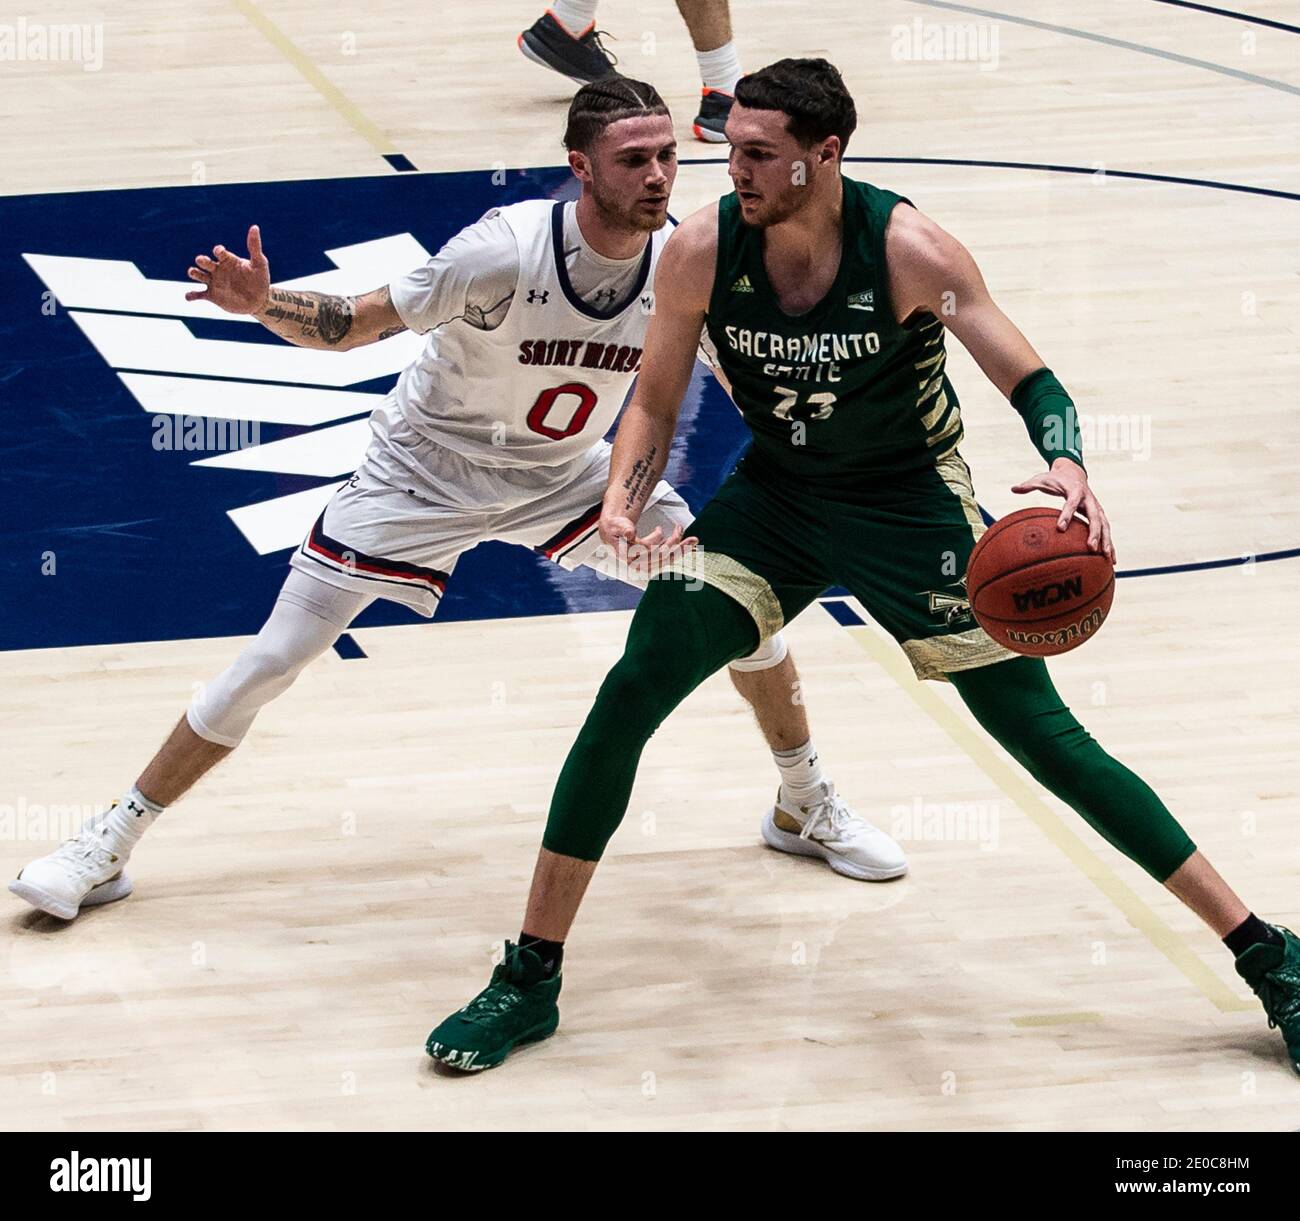 Moraga, CA U.S. 30th Dec, 2020. A. Sacramento State Hornets guard Bryce Fowler (23) drives to the basket during the NCAA Men's Basketball game between Sacramento State Hornets and the Saint Mary's Gaels 45-63 lost at McKeon Pavilion Moraga Calif. Thurman James/CSM/Alamy Live News Stock Photo